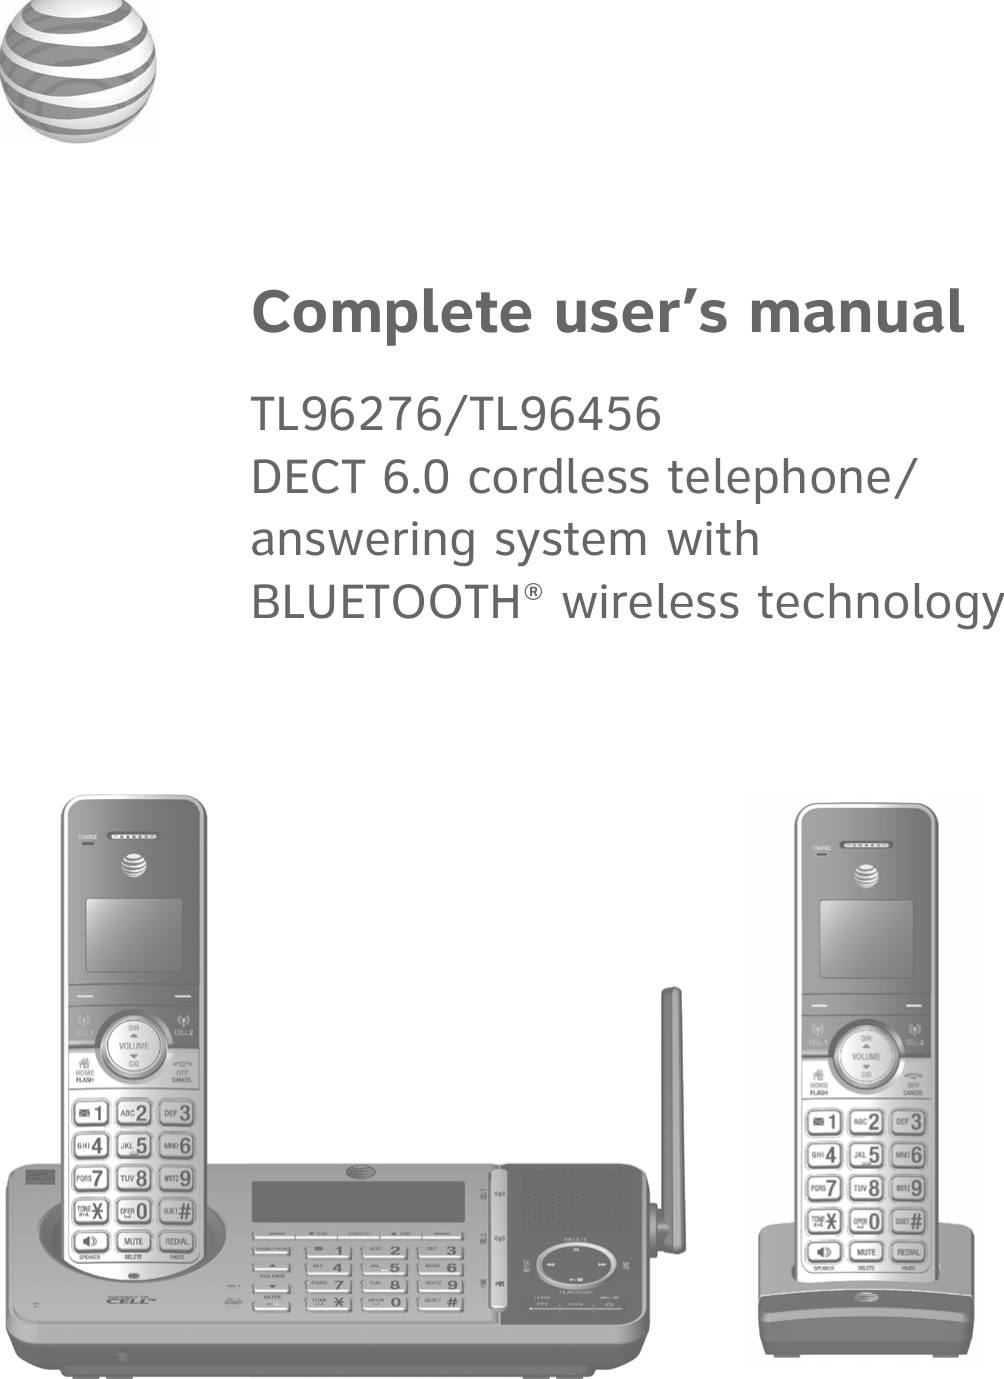 Complete user’s manualTL96276/TL96456DECT 6.0 cordless telephone/answering system with BLUETOOTH® wireless technology